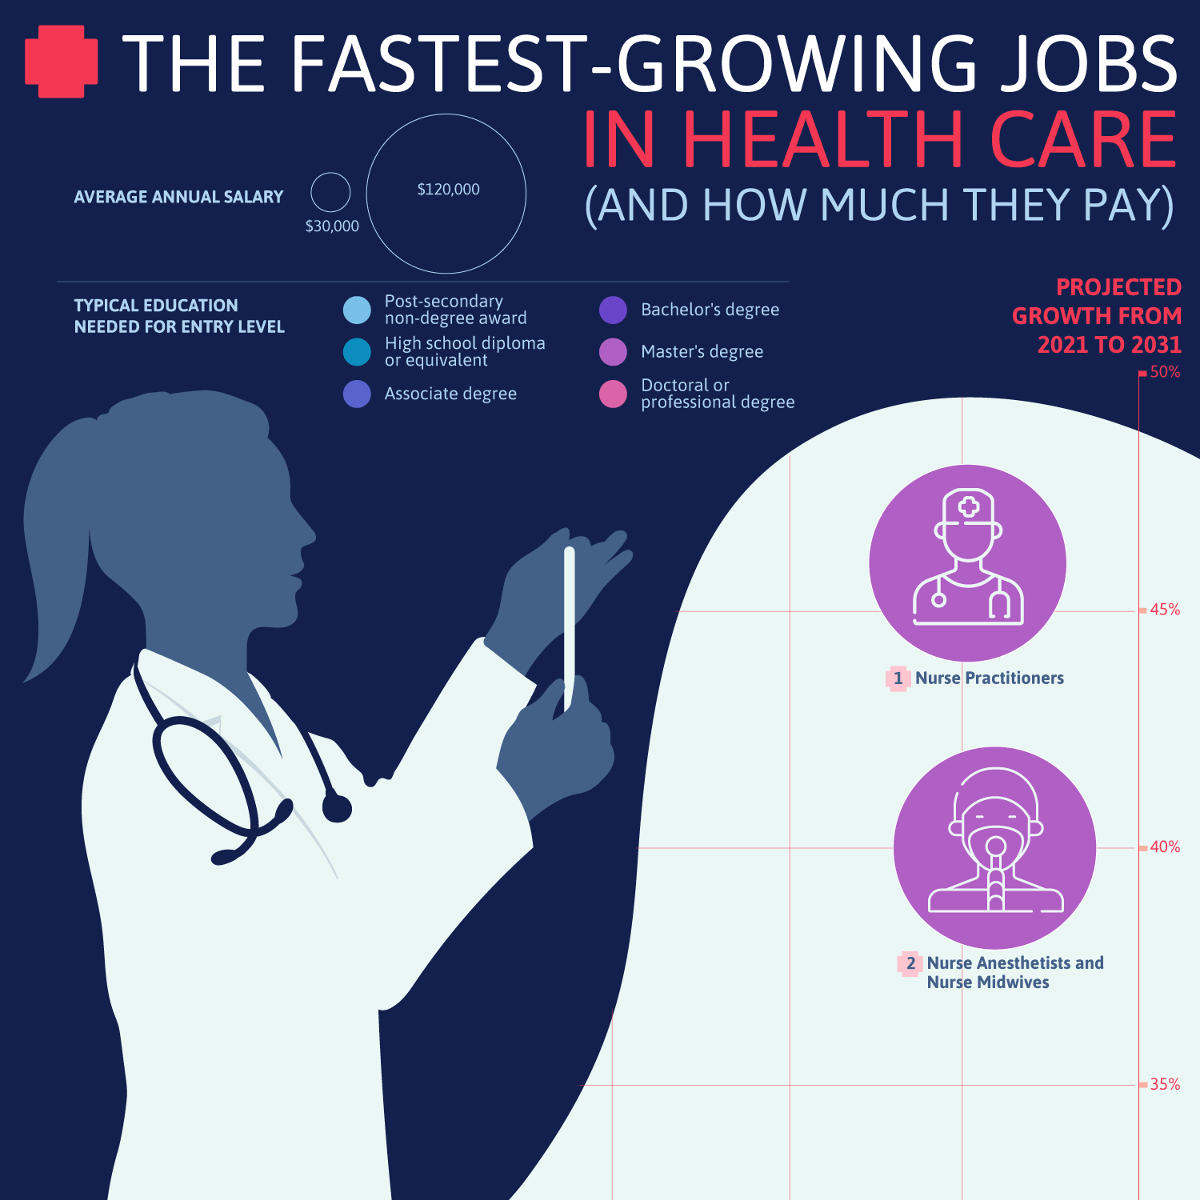 The fastest growing health care jobs